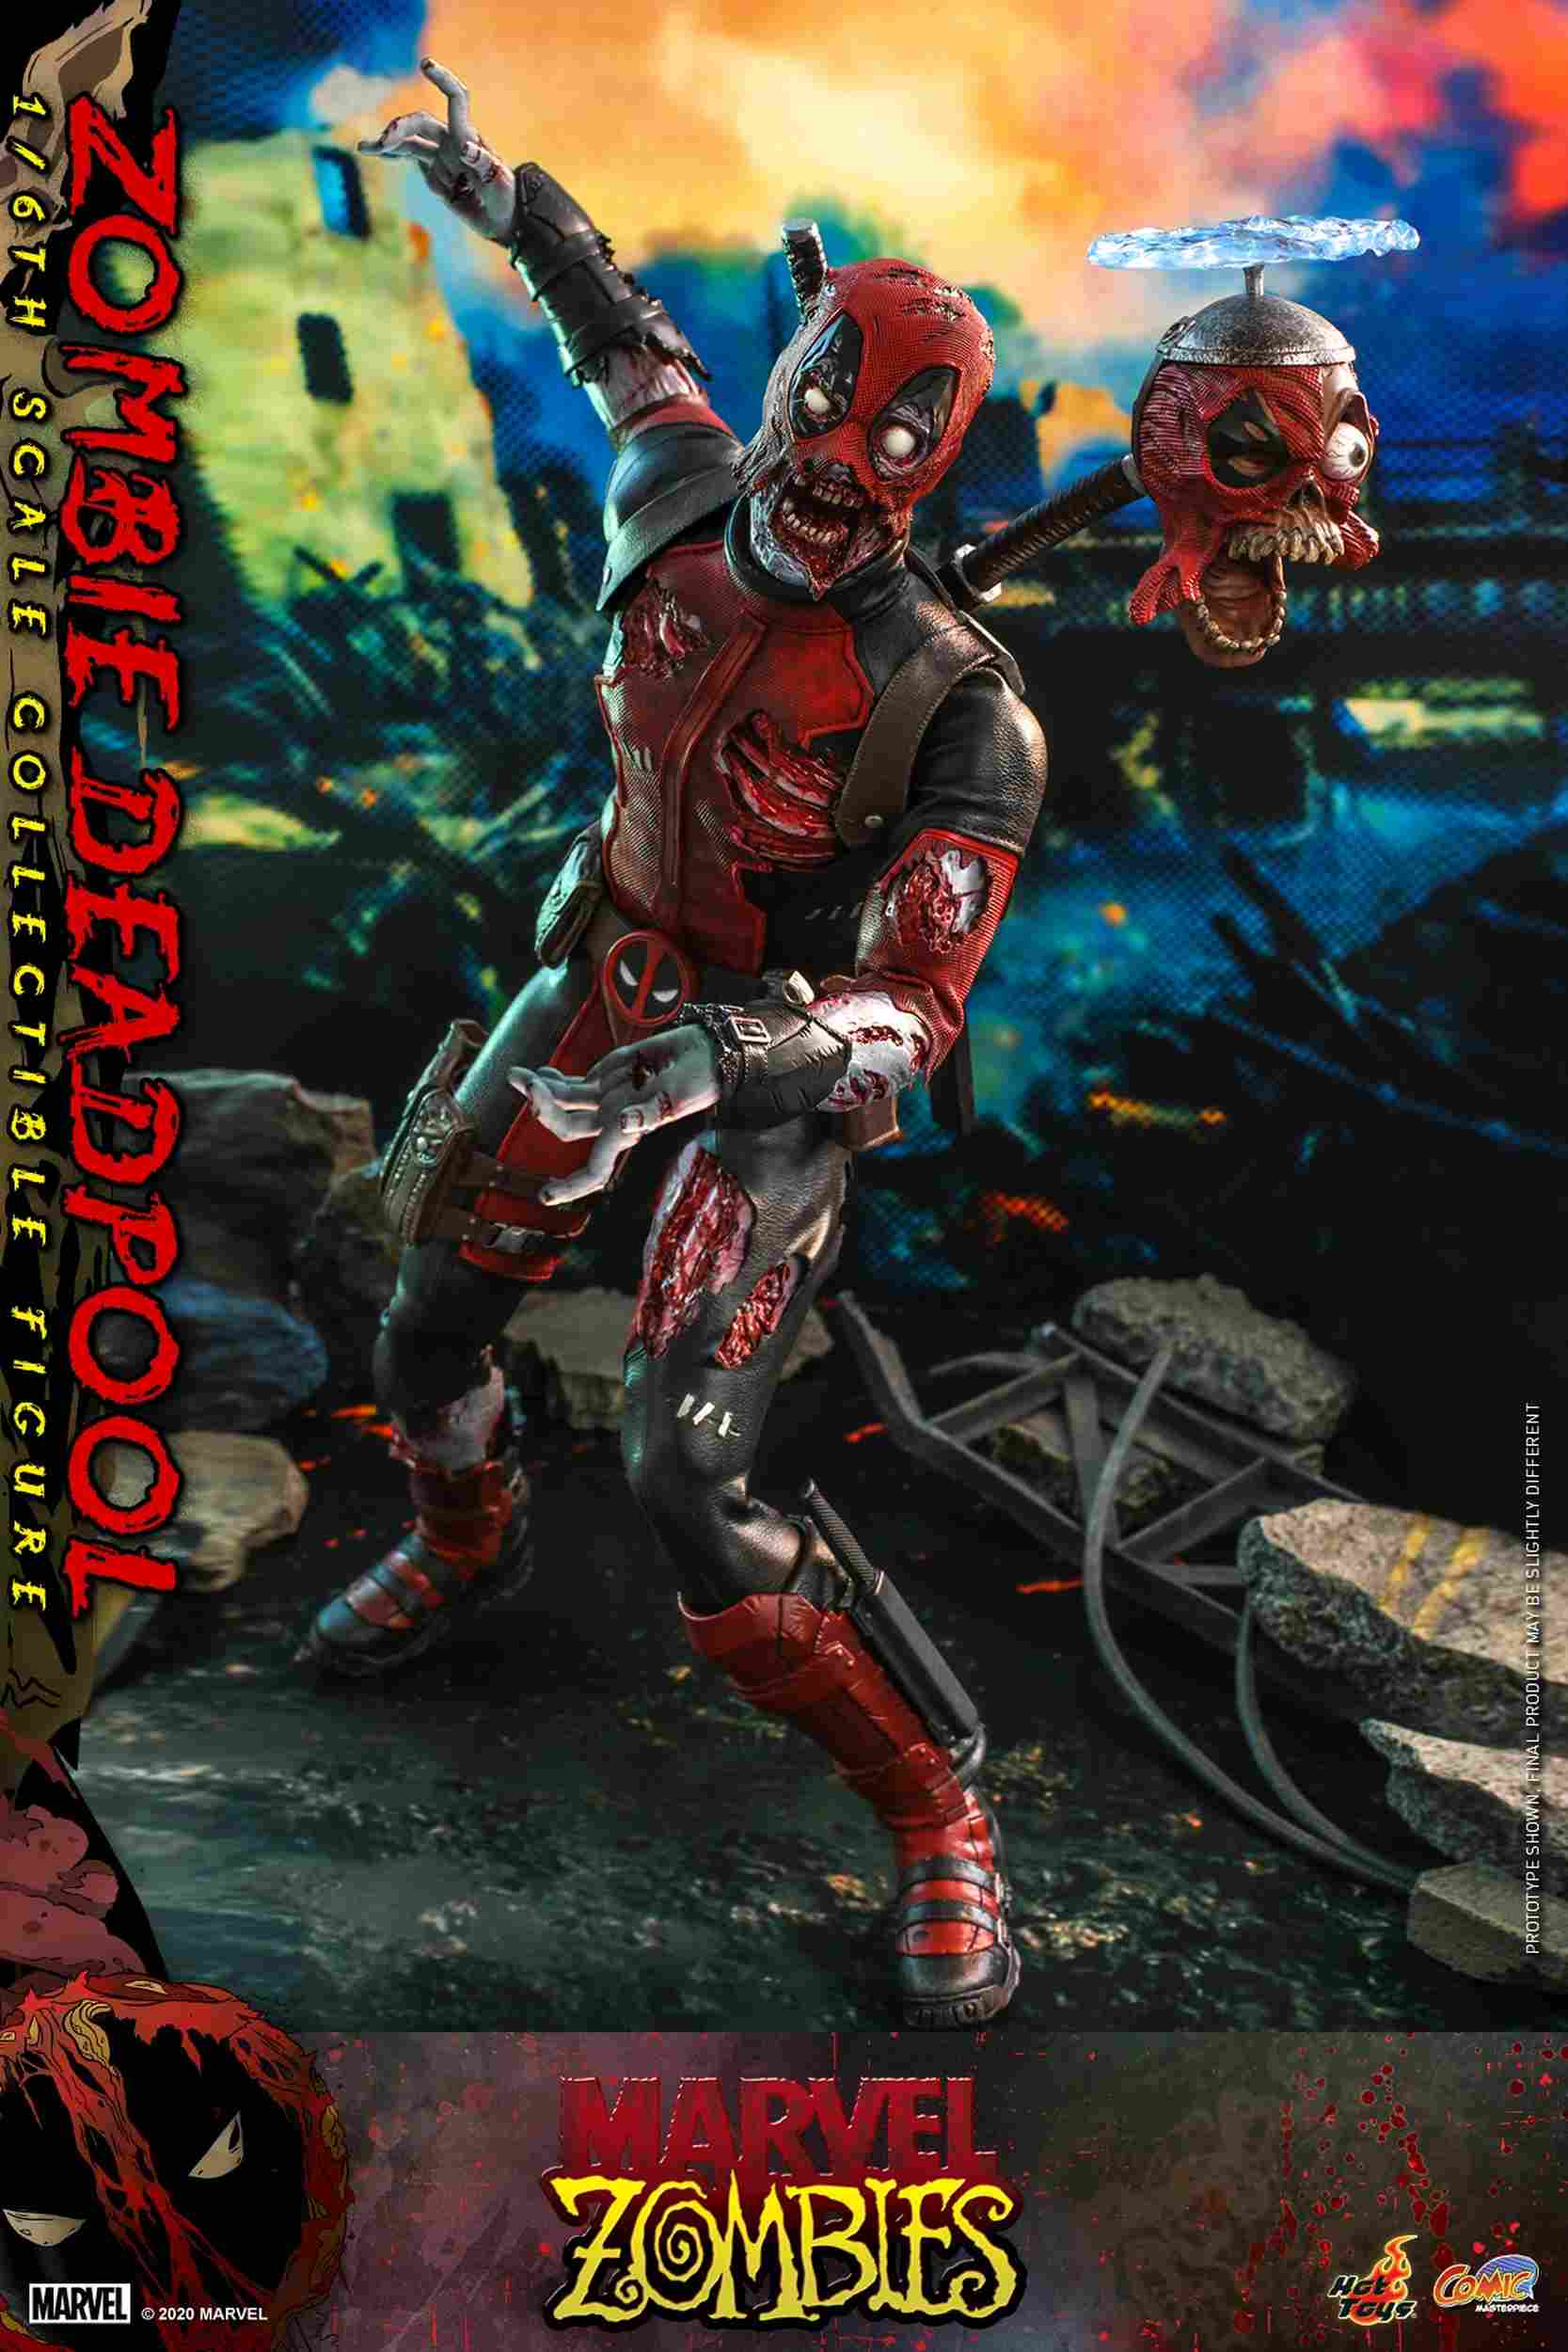 Hot Toys Marvel Zombies 1/6th scale Zombie Deadpool